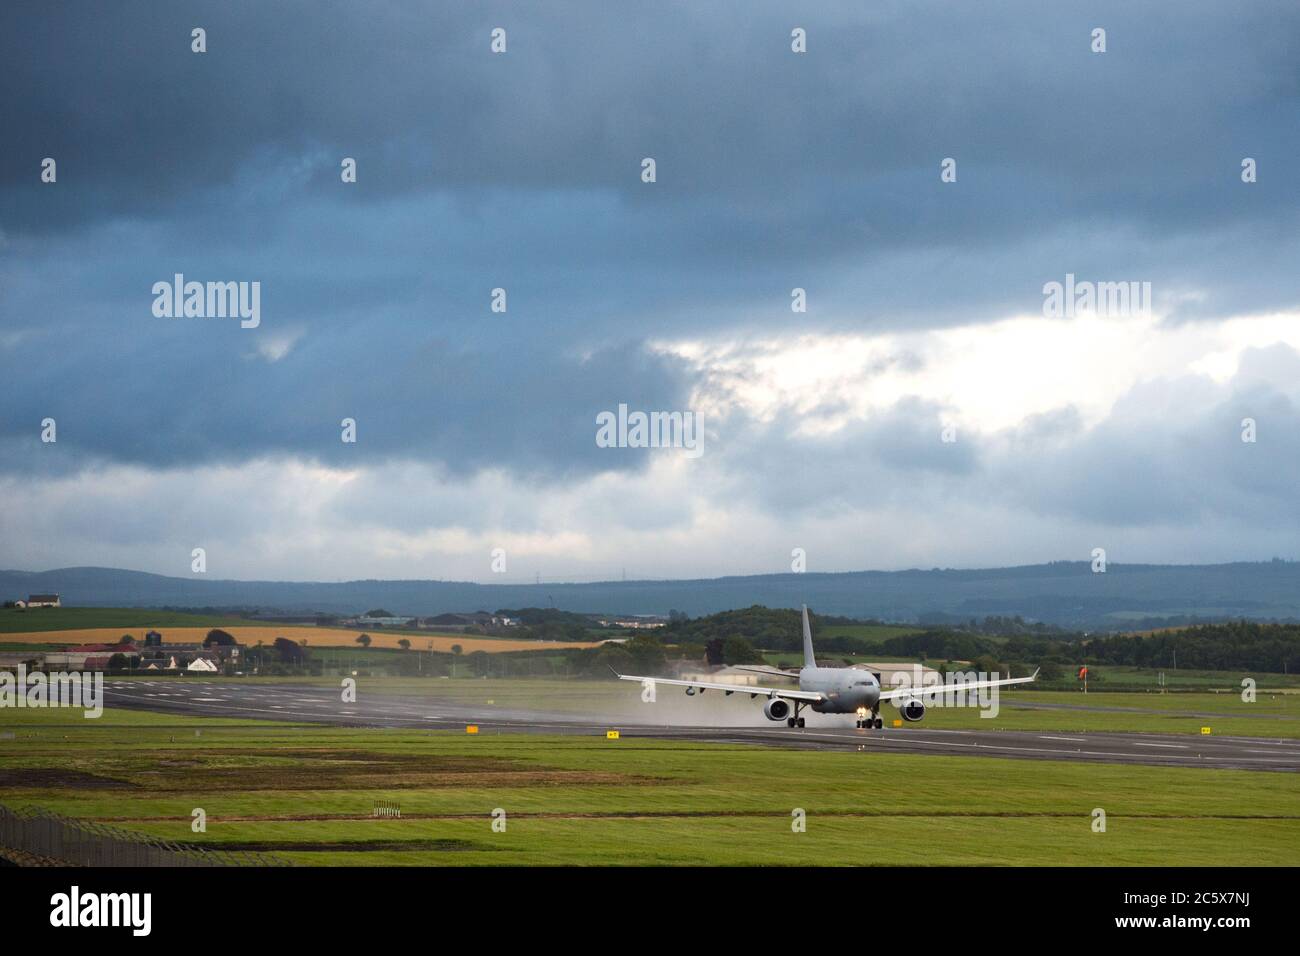 Prestwick, Scotland, UK. 5th July, 2020. Pictured: Royal Air Force (R.A.F) Voyager Aircraft (Reg ZZ343), which is an Air Refuelling Transport for the RAF, seen departing from Glasgow Prestwick International Airport after a short stay where it landed less than an hour earlier. Credit: Colin Fisher/Alamy Live News Stock Photo